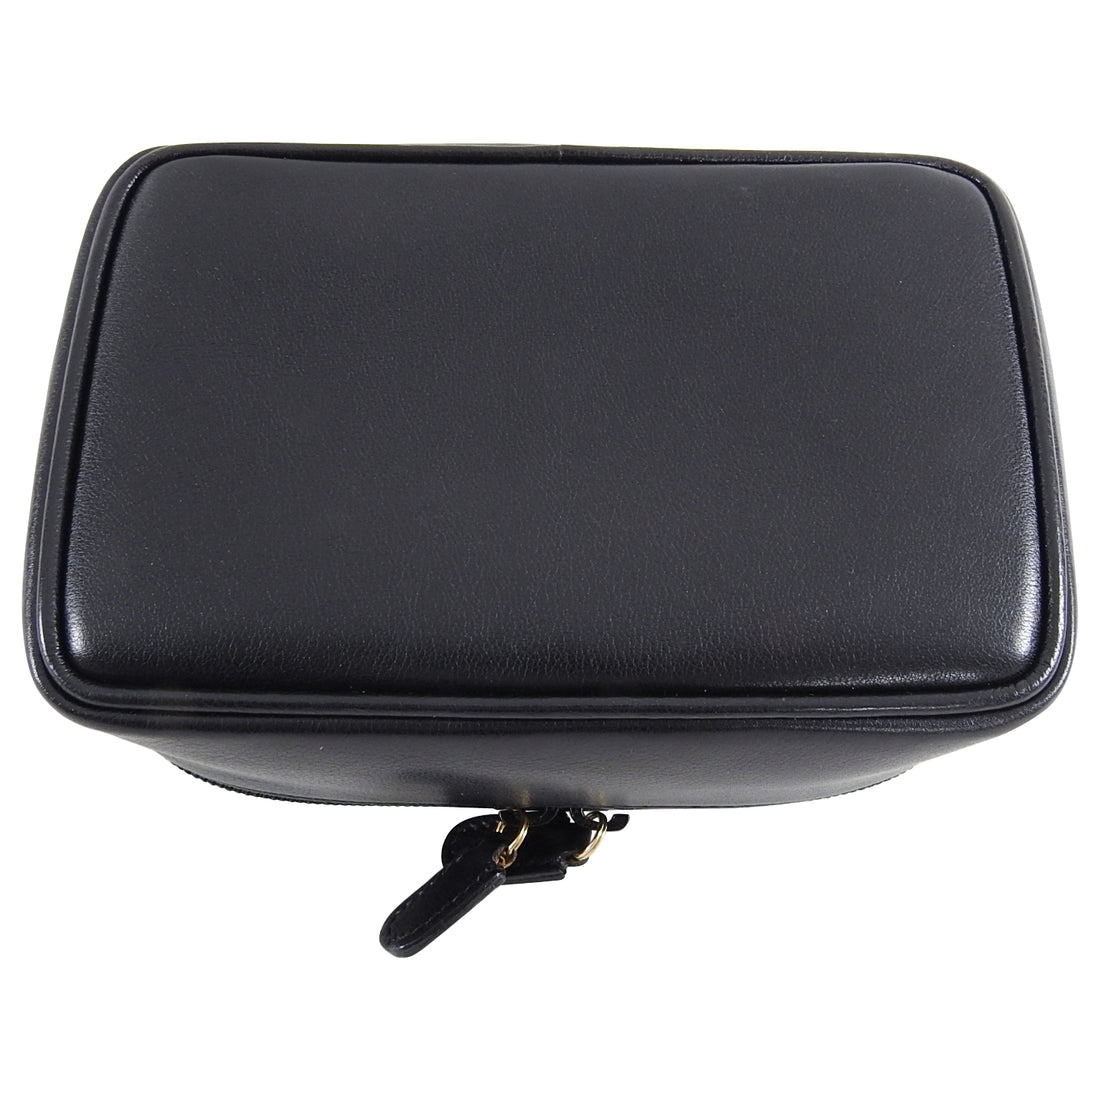 Gucci Vintage Small Black Leather Cosmetic Vanity Travel Bag